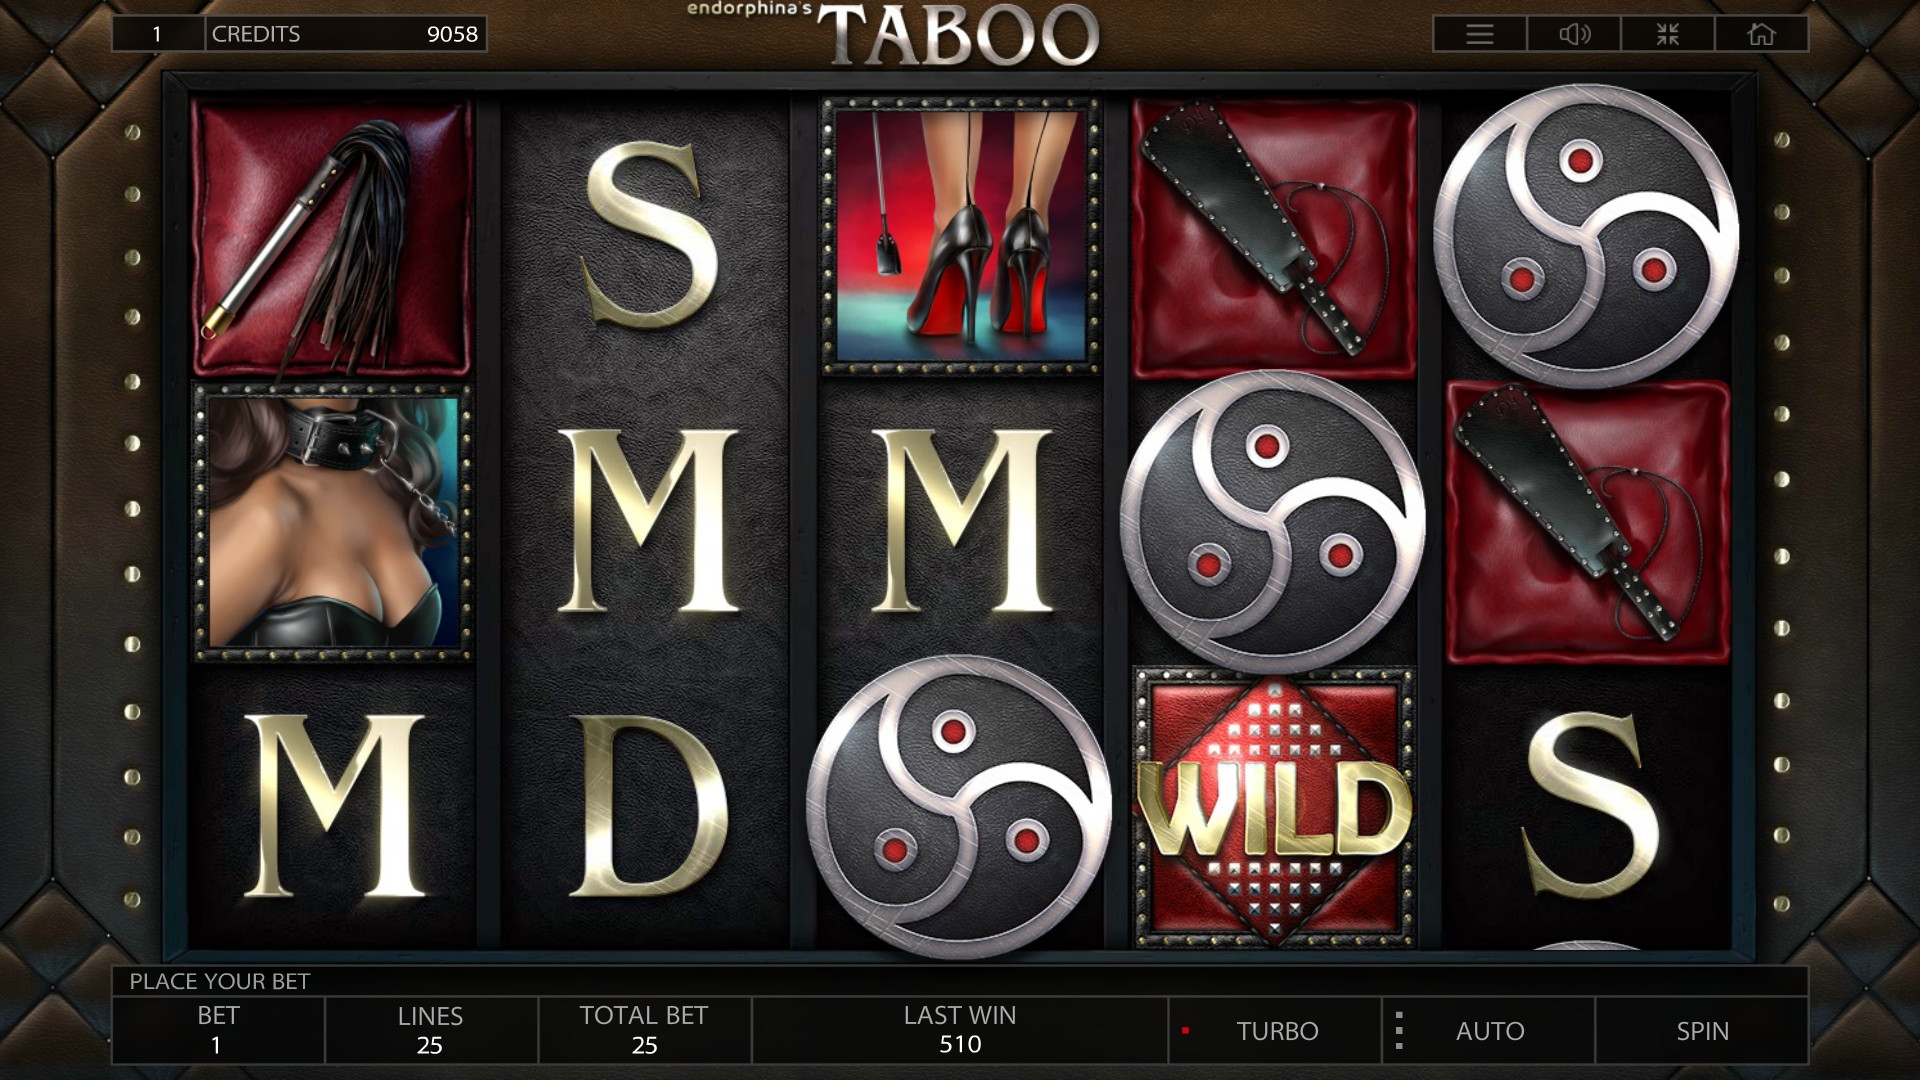 Taboo (Taboo) from category Slots